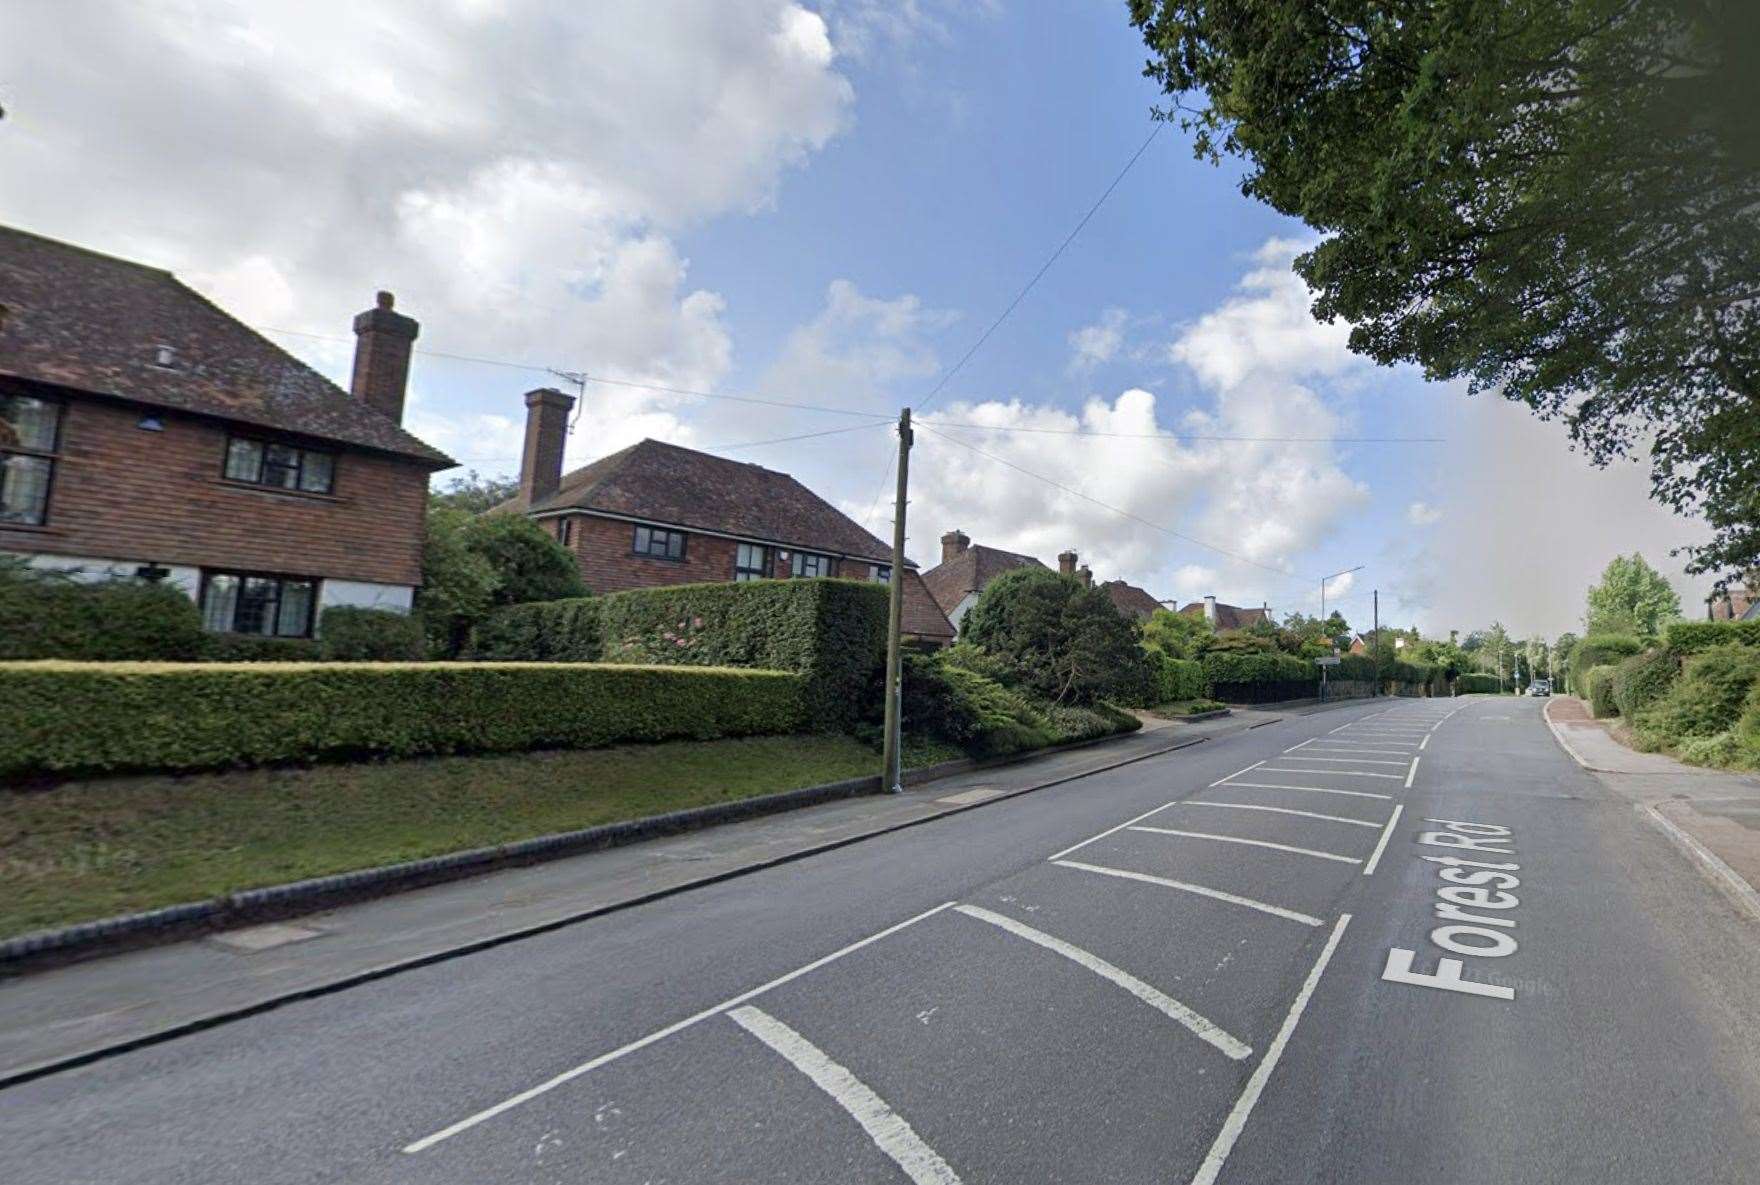 Detectives have charged a suspect with a burglary at a house near Forest Road, Tunbridge Wells. Picture: Google Maps